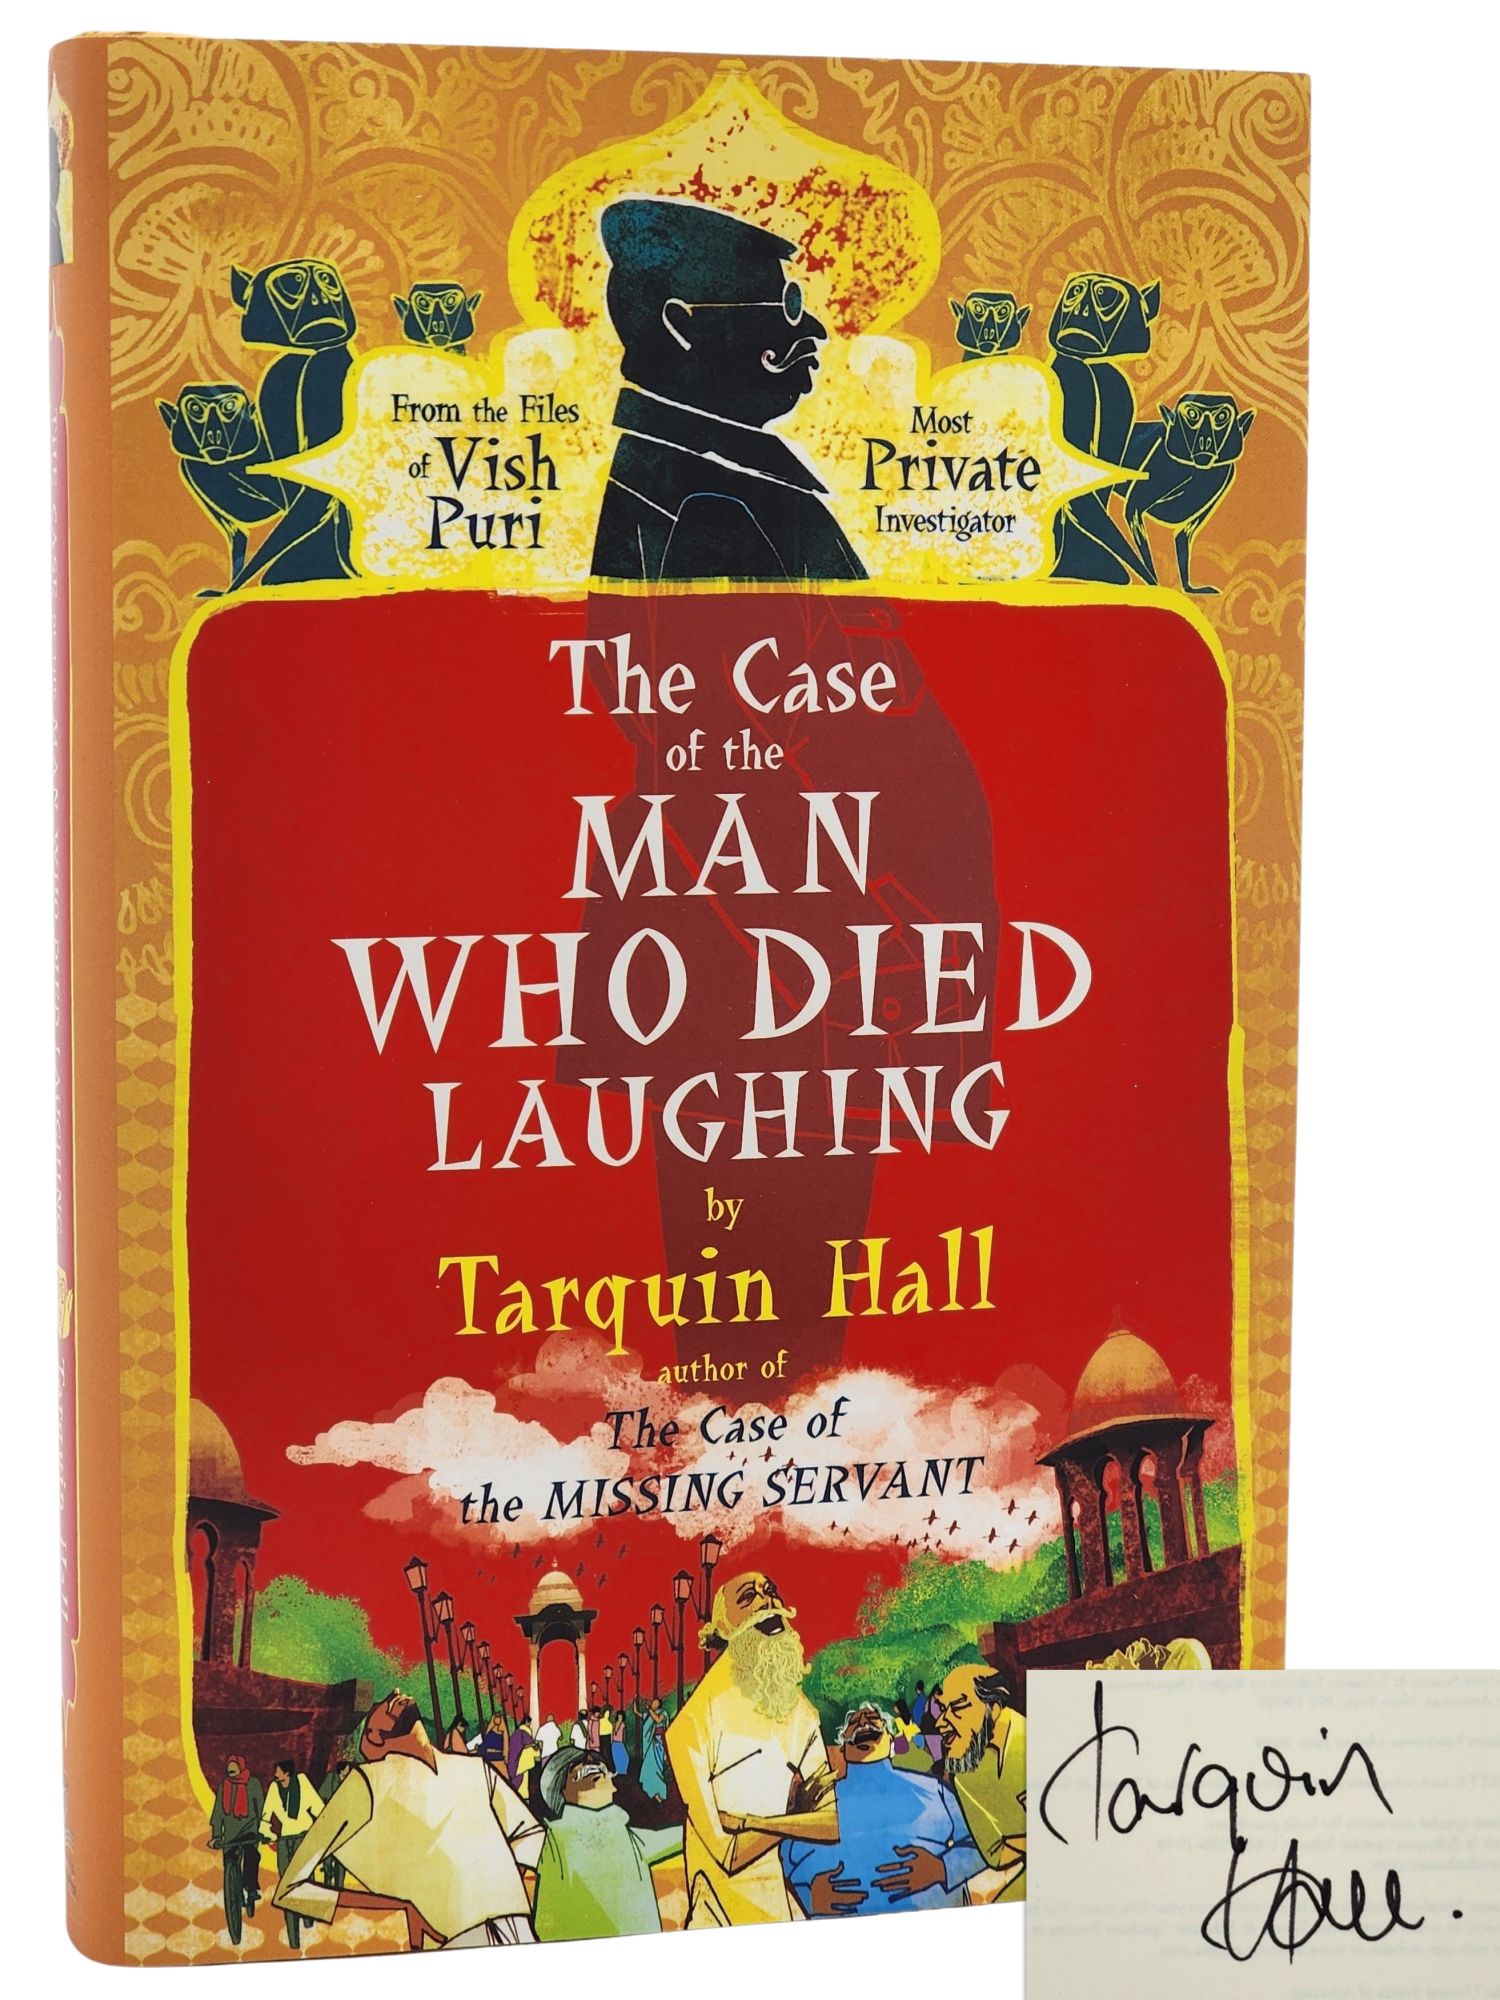 [Book #27215] THE CASE OF THE MAN WHO DIED LAUGHING. Tarquin Hall.